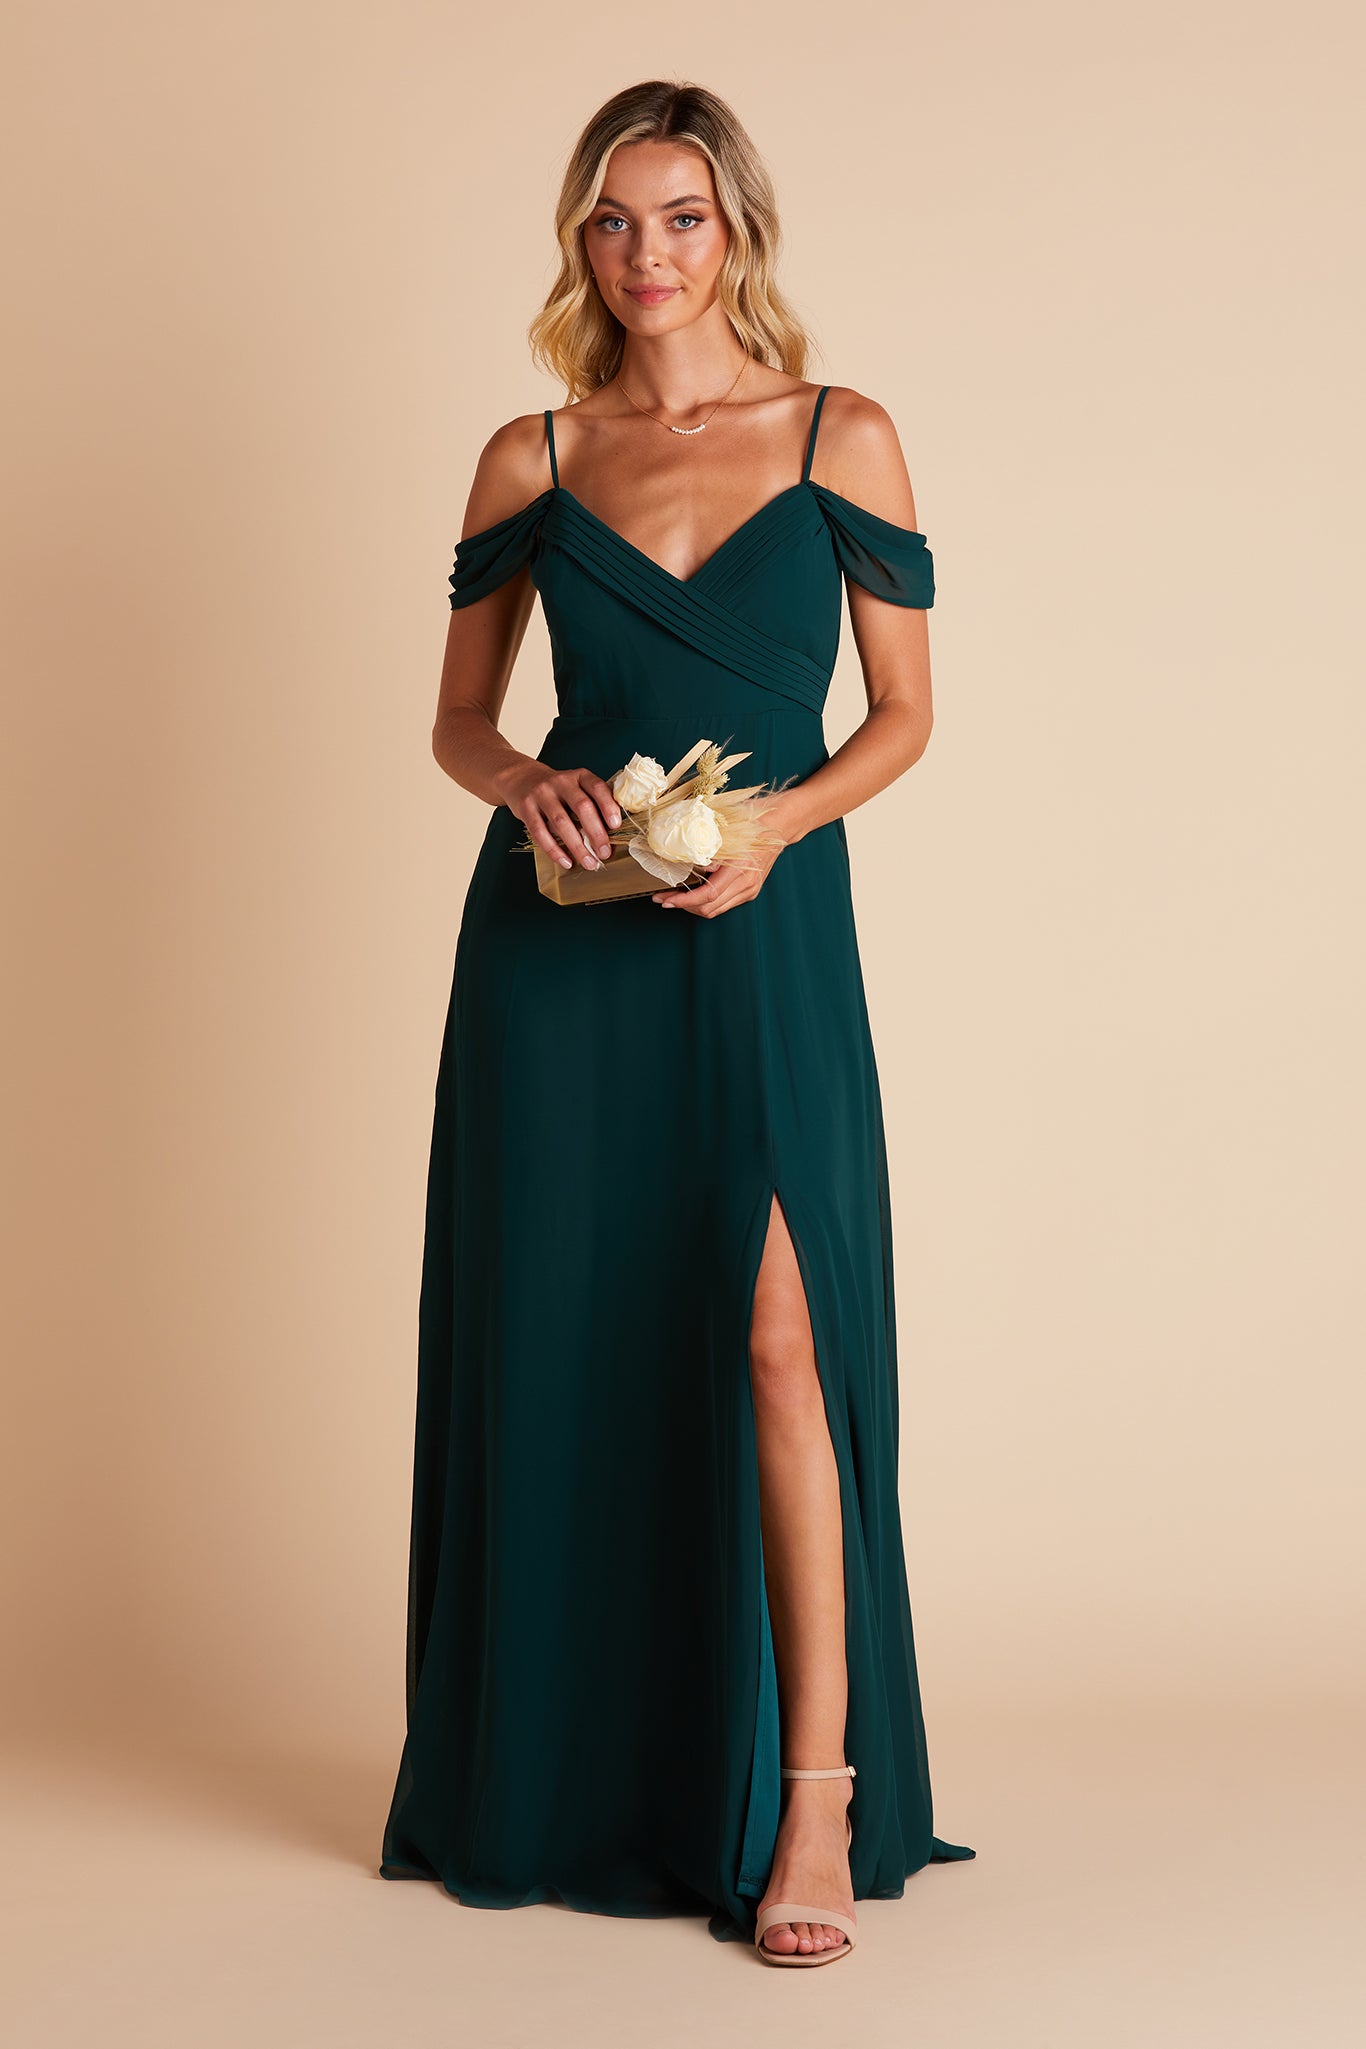 Spence convertible bridesmaid dress in emerald green chiffon by Birdy Grey, front view